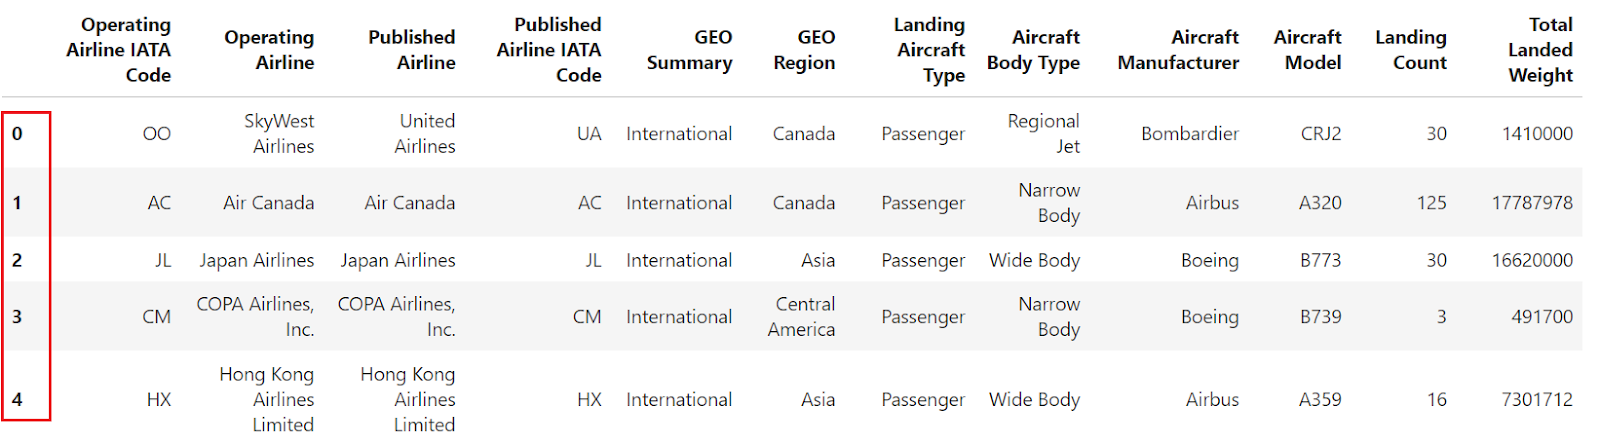 setting the column Operating Airline IATA Code as the new index of the dataframe using set_index method